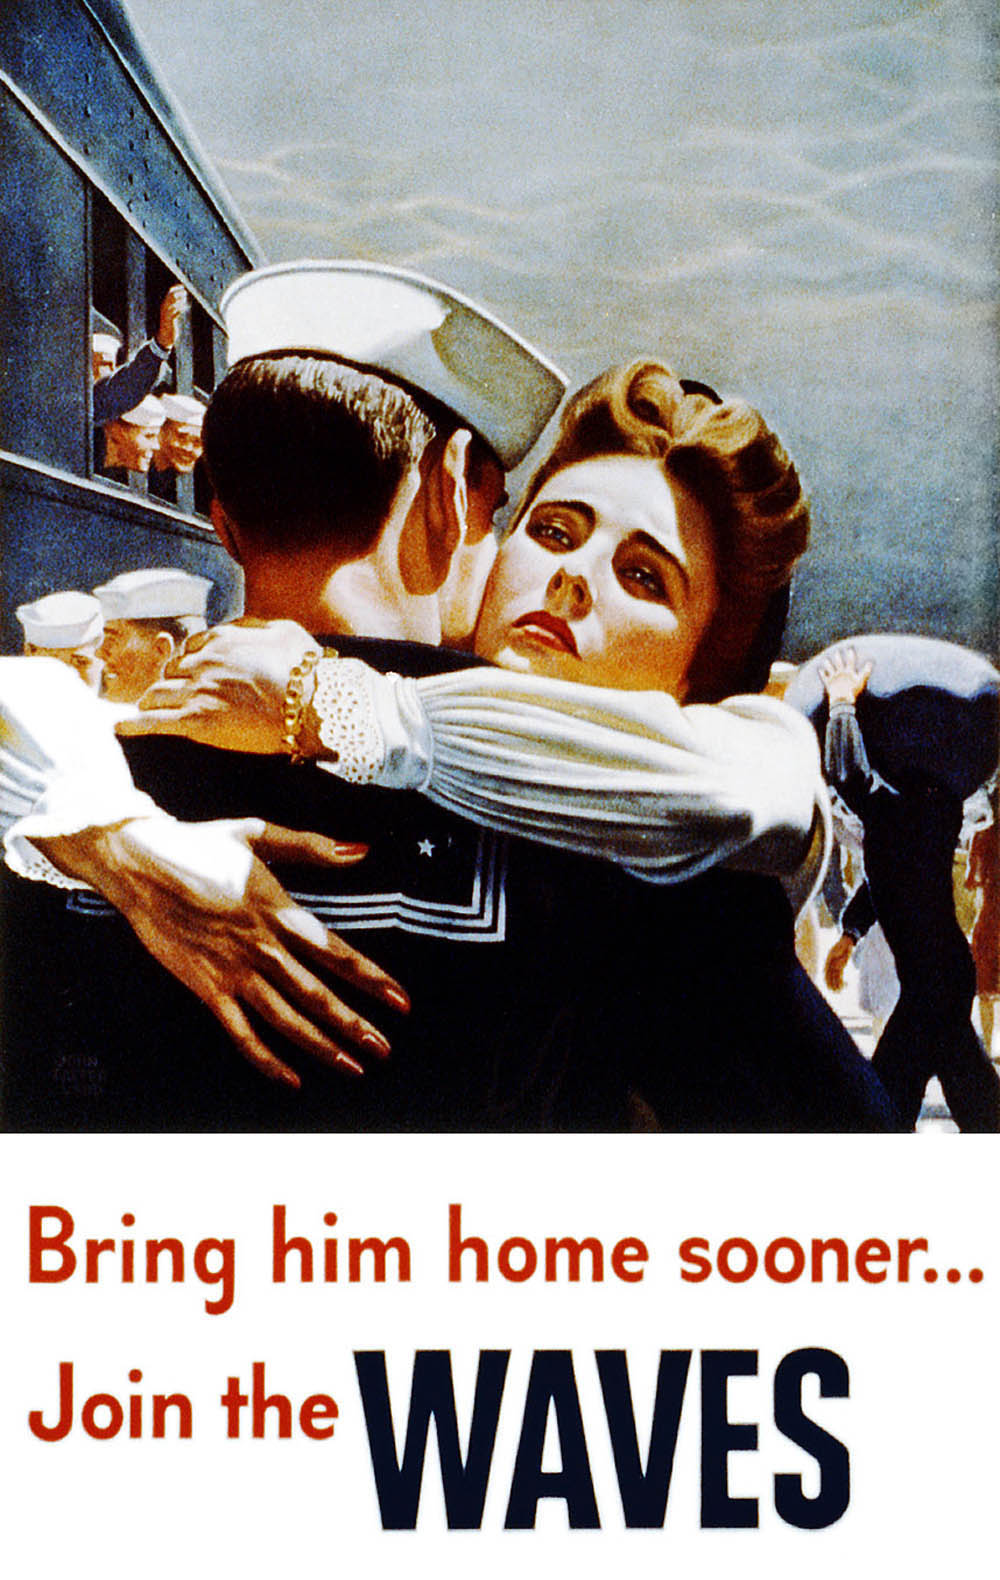 "Bring him home sooner… Join the WAVES" poster for the U.S. Naval Reserve Women's Reserve, better known as the WAVES (Women Accepted for Volunteer Emergency Service).  (U.S. Library of Congress Prints and Photographs.)